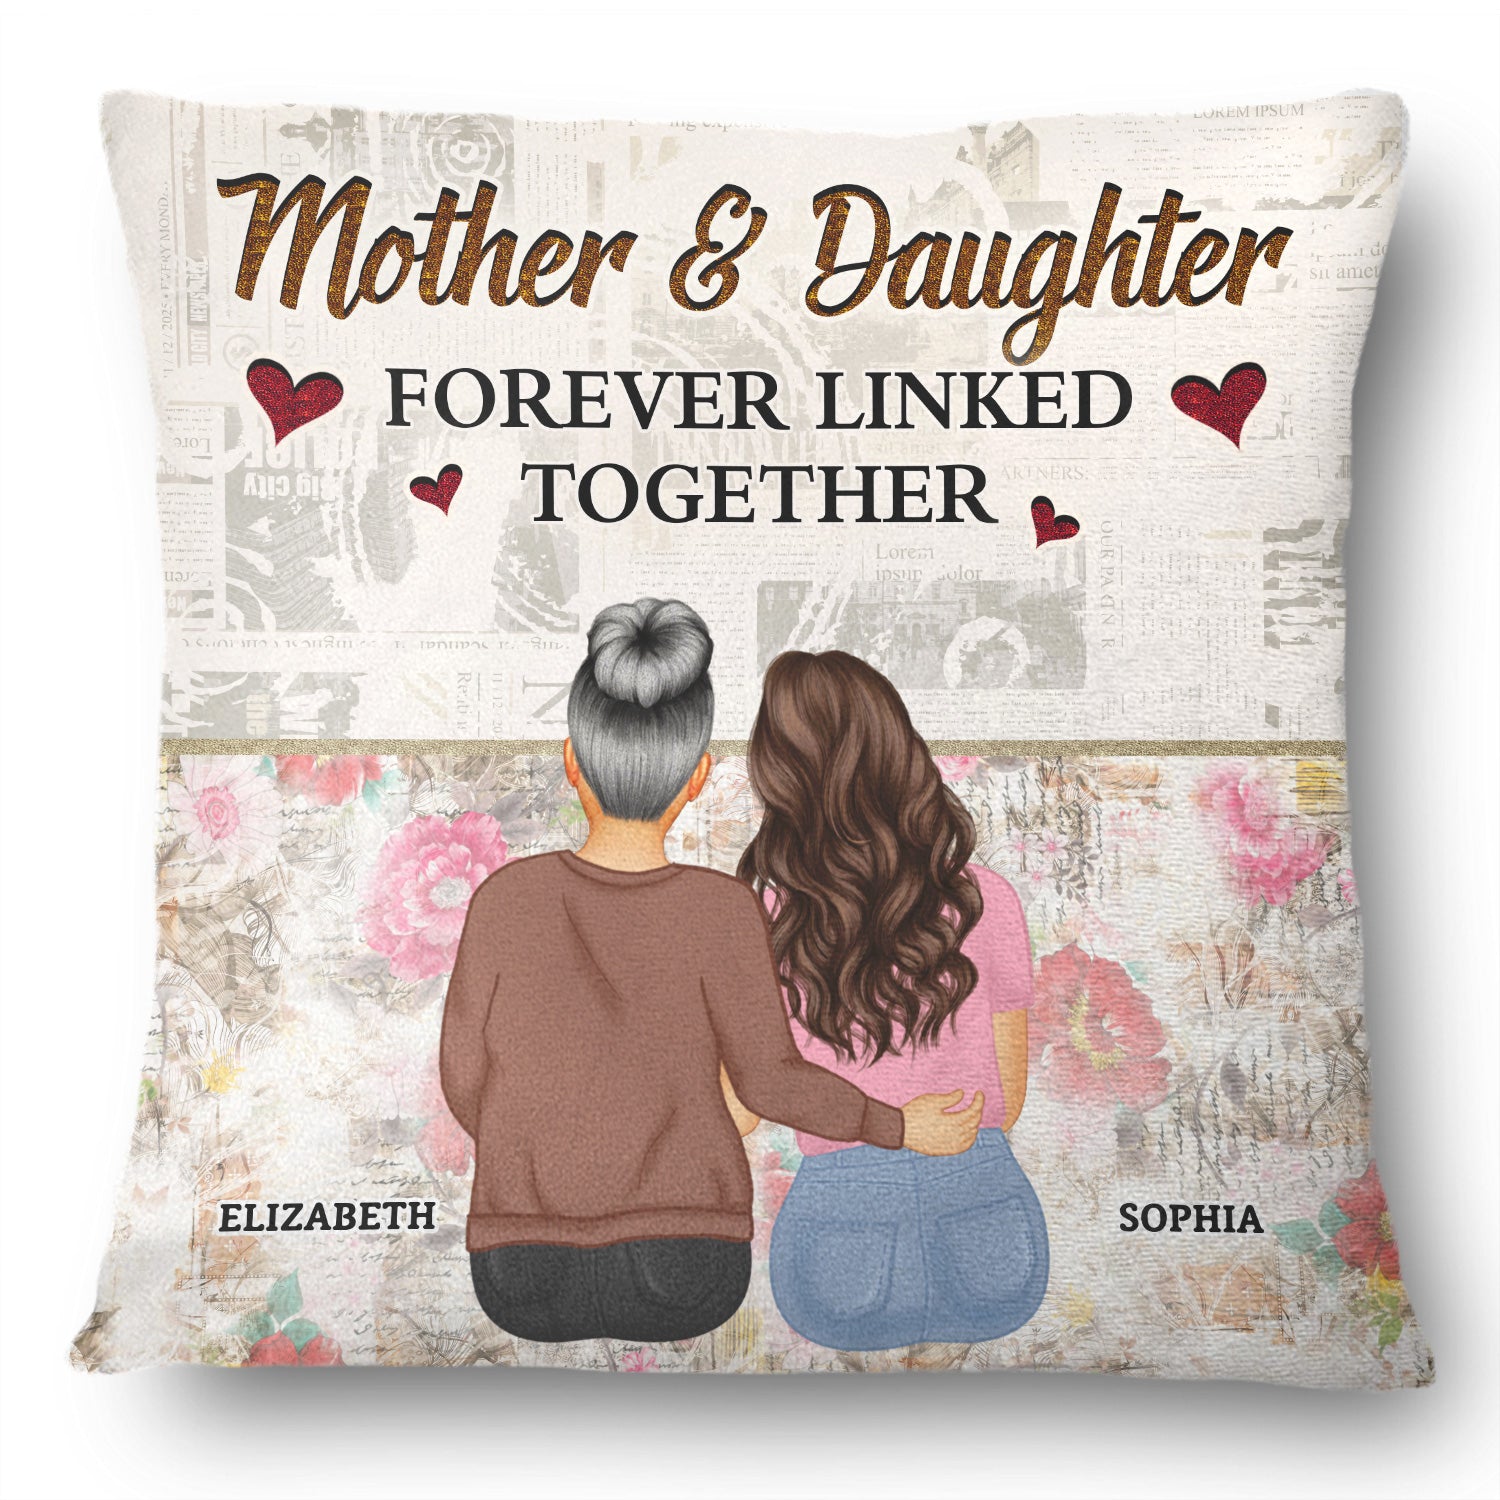 Mother And Children Forever Link Together - Loving Gift For Mom, Grandma, Nana - Personalized Pillow